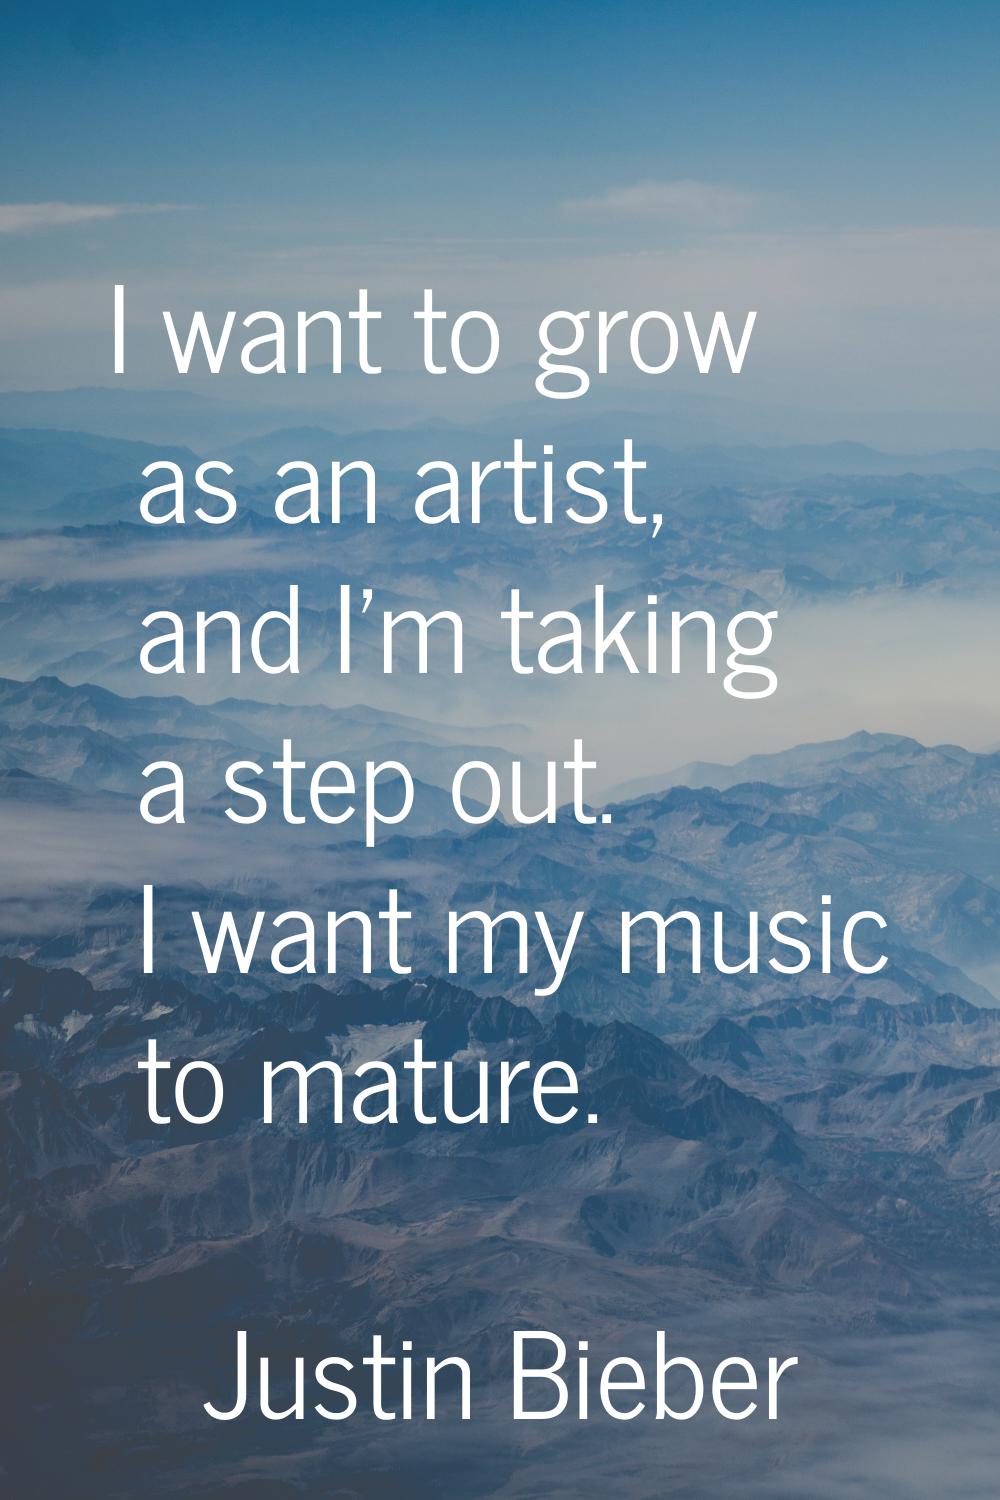 I want to grow as an artist, and I'm taking a step out. I want my music to mature.